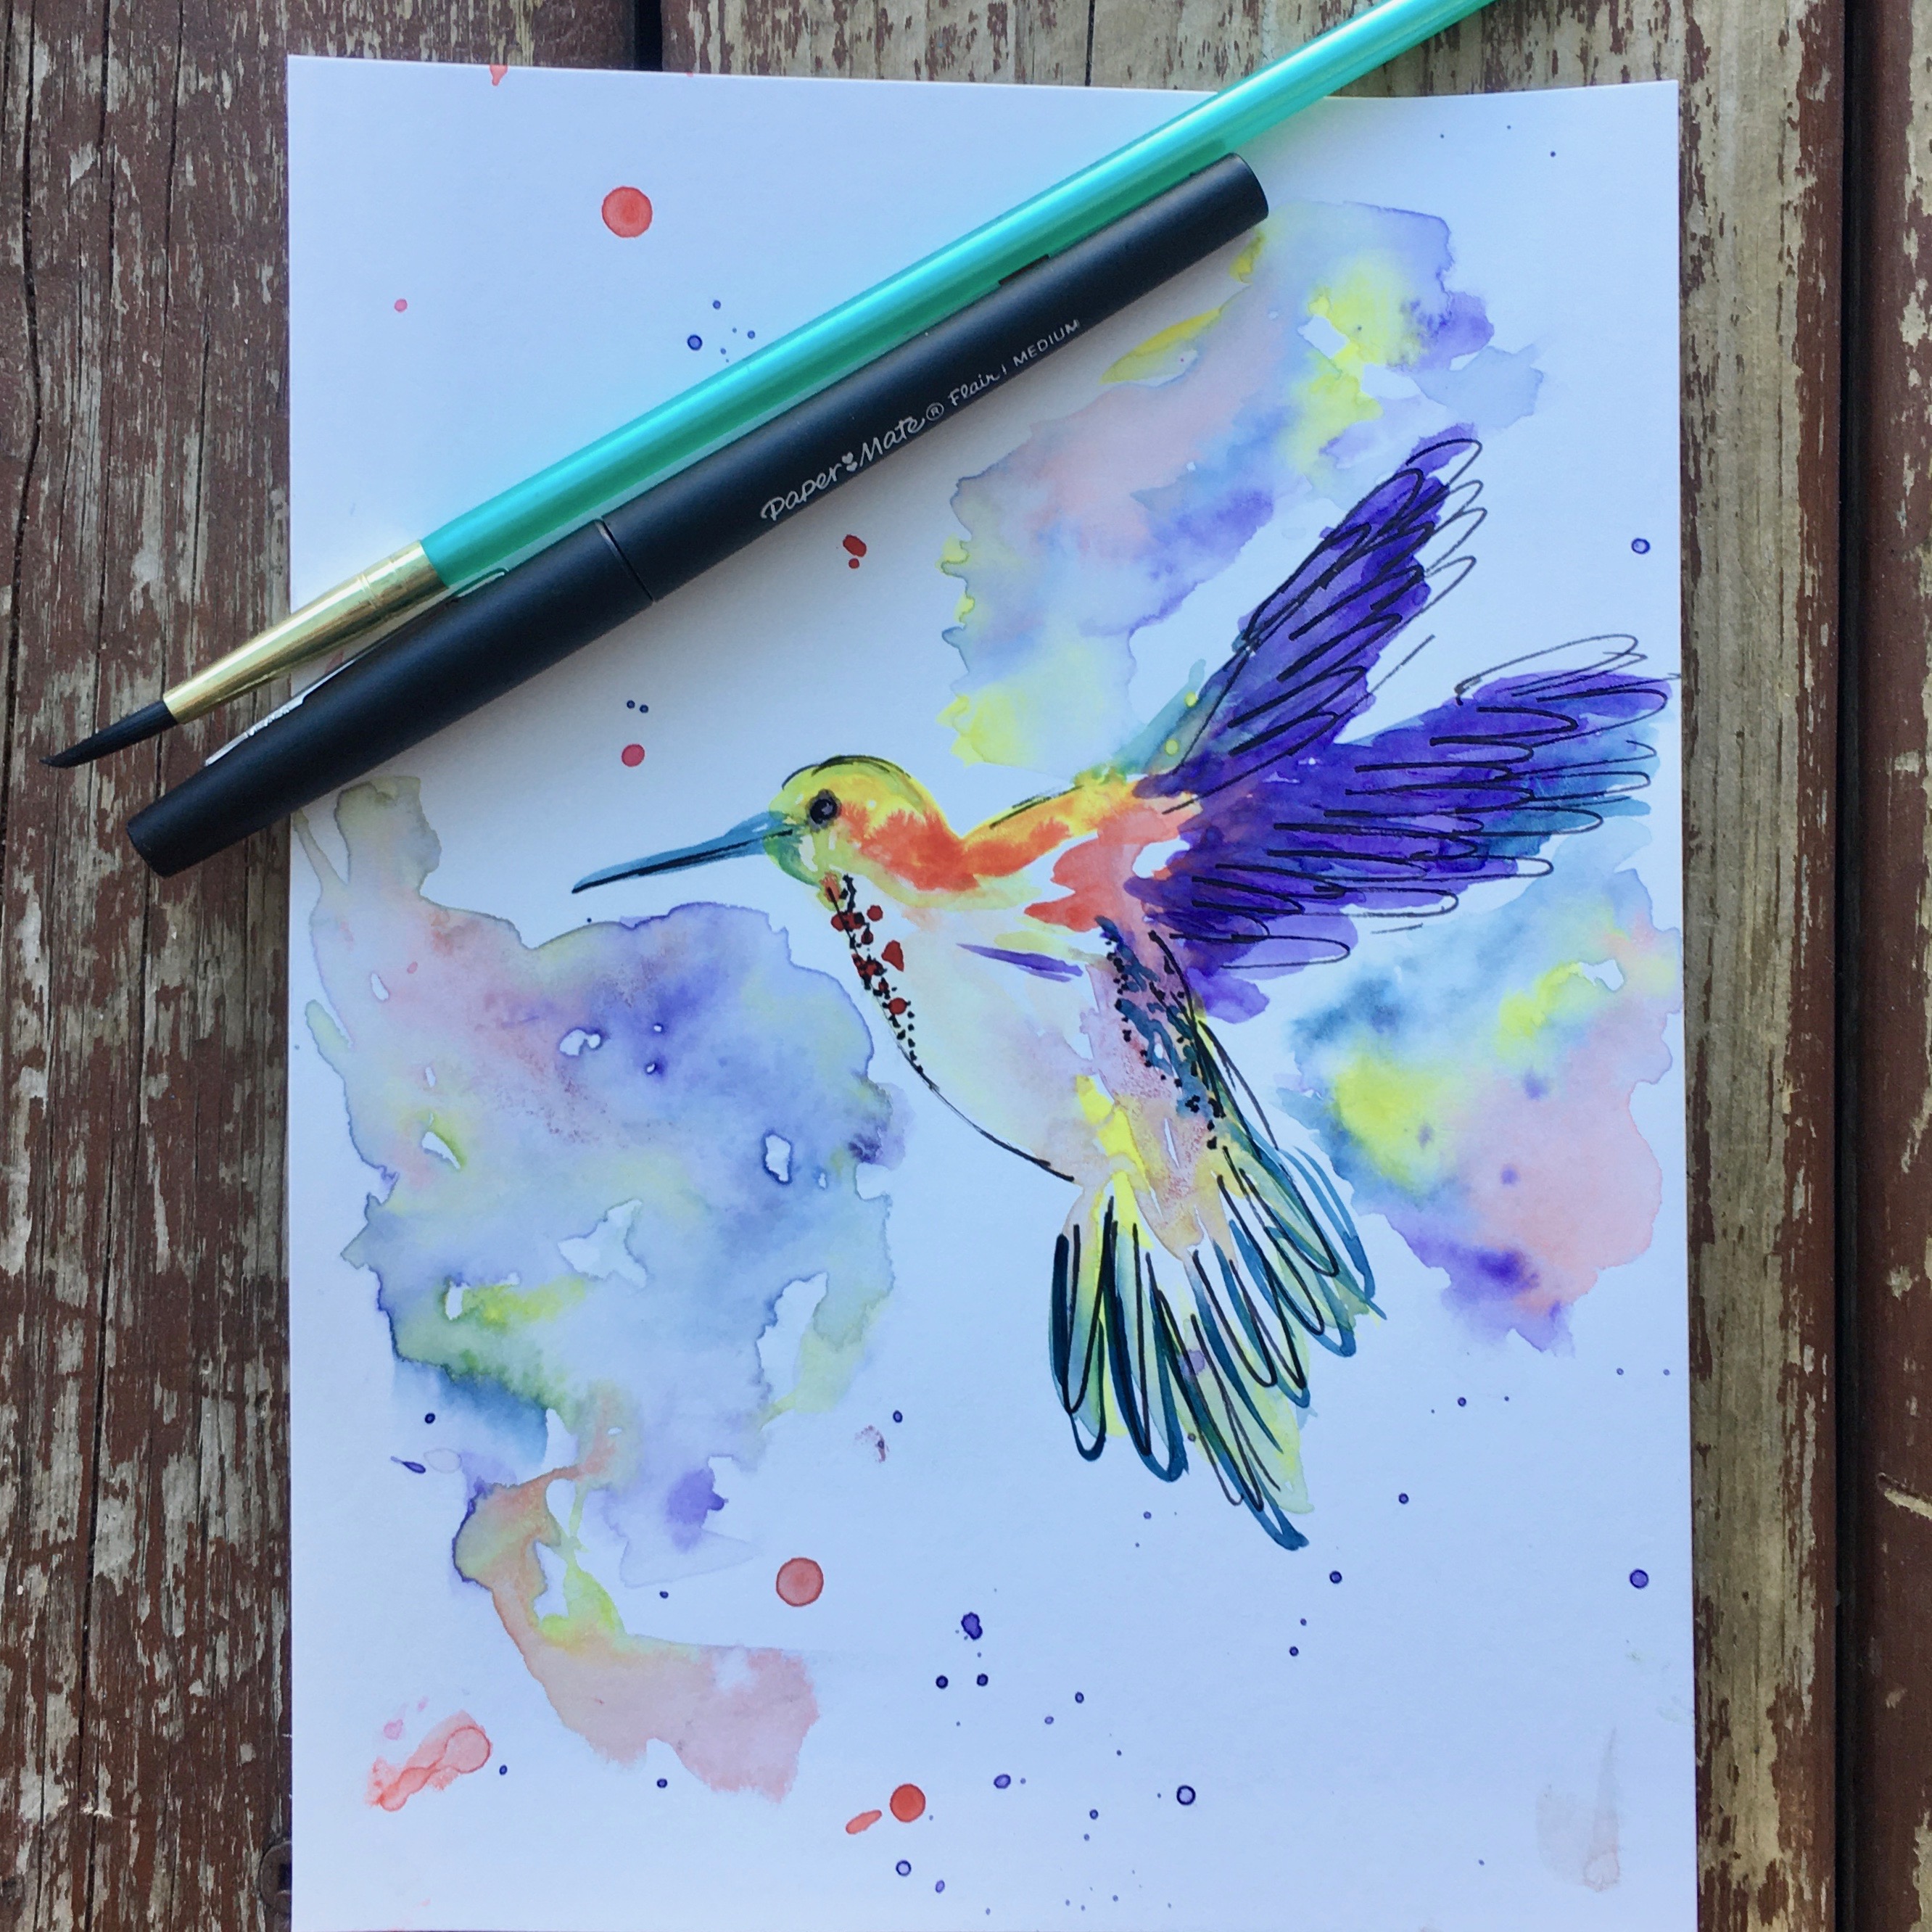 A Watercolour Hummingbird experience project by Yaymaker